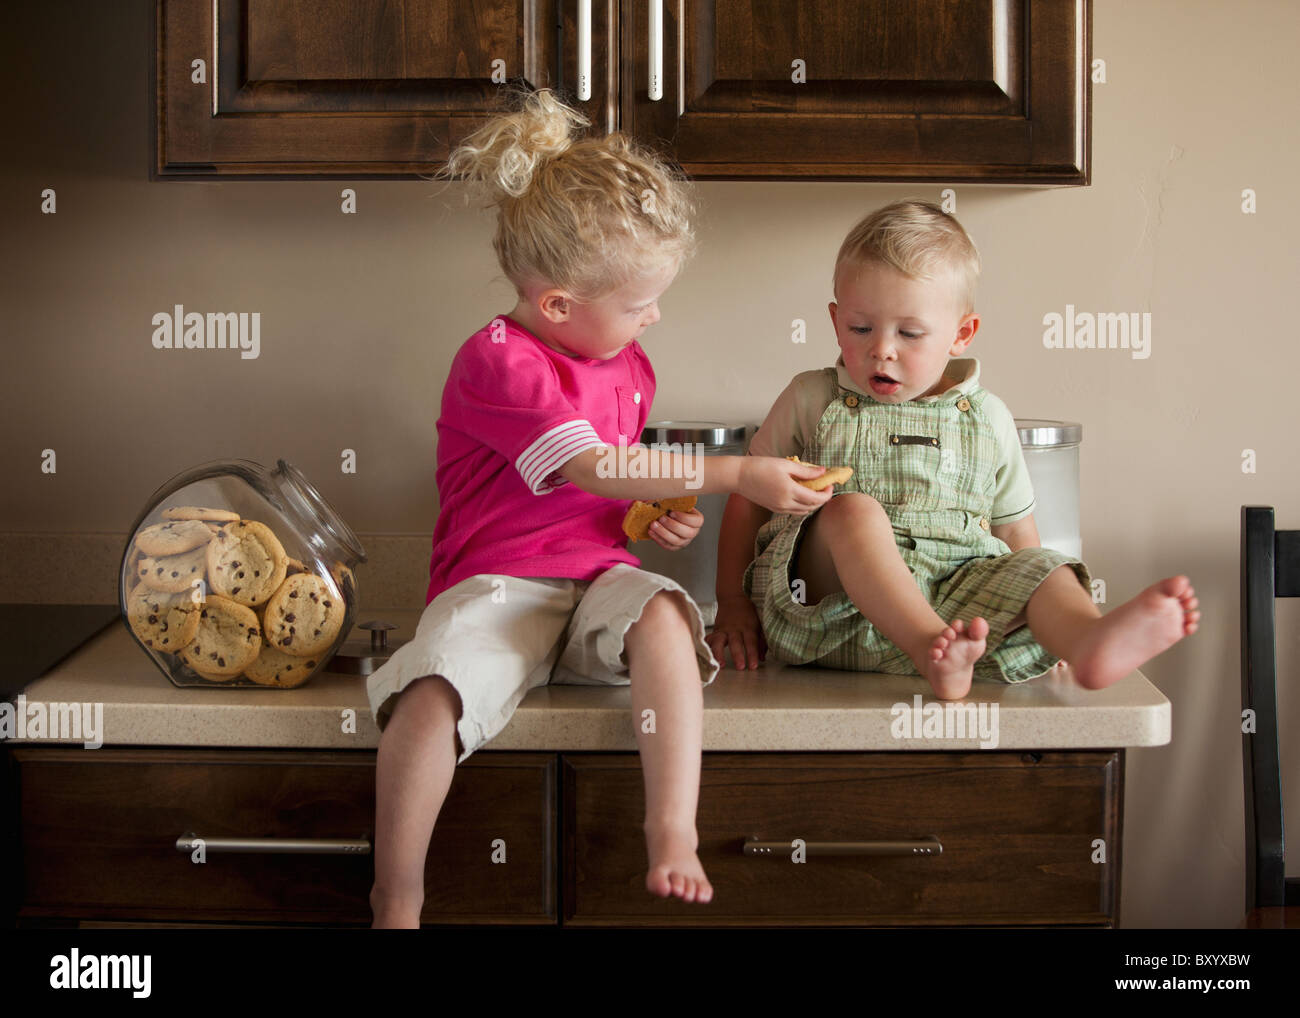 Baby boy and girl sharing cookies on kitchen worktop Stock Photo